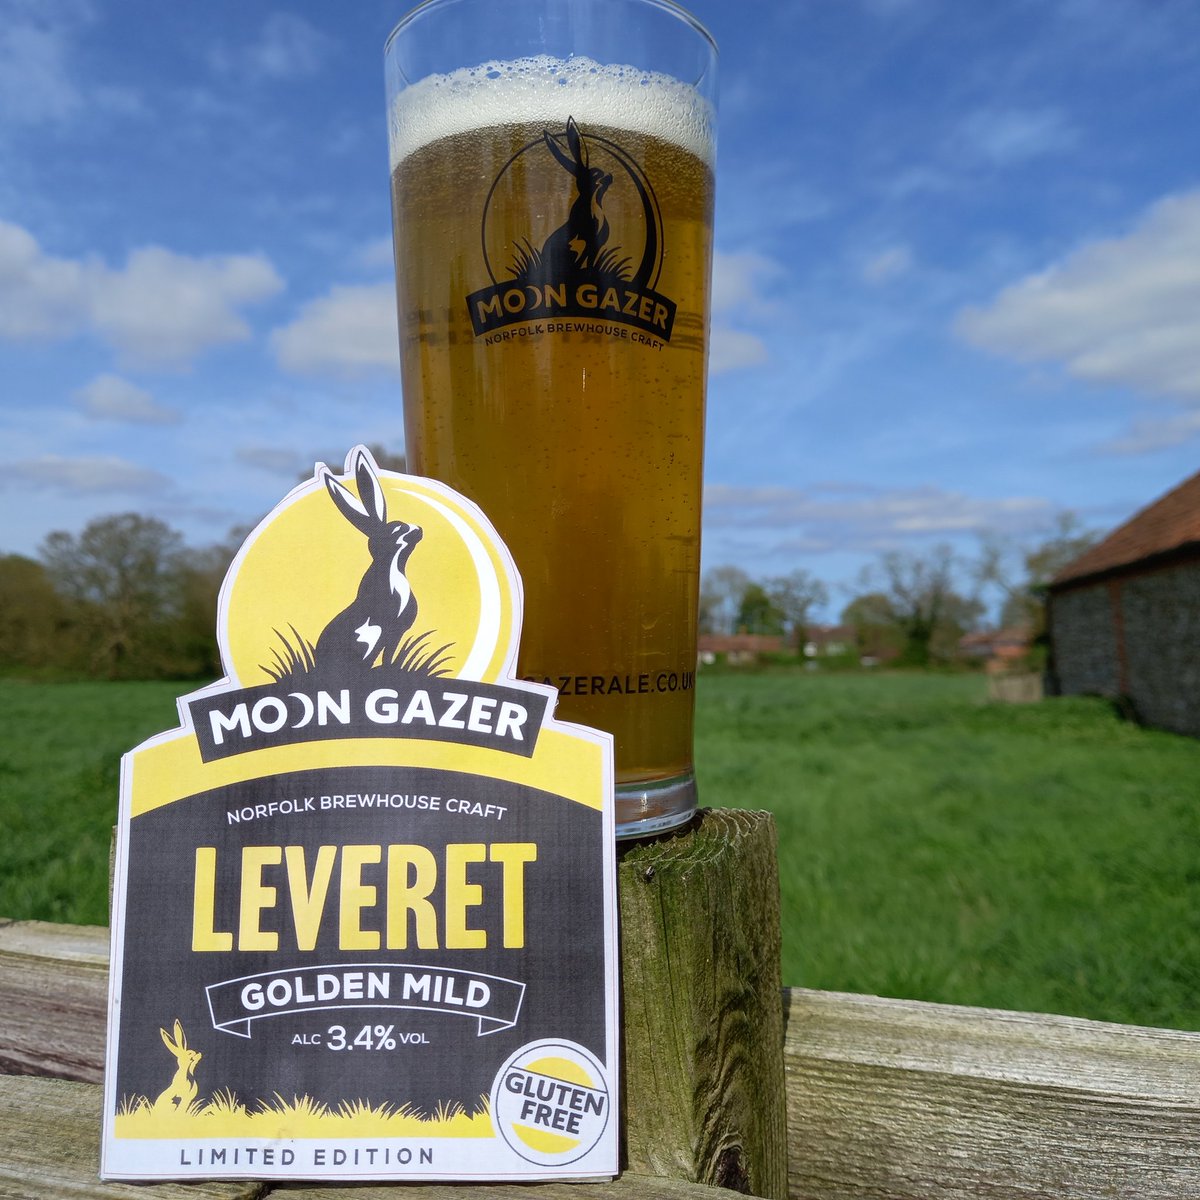 Coming soon, are you ready for a Golden Mild? And its #glutenfree